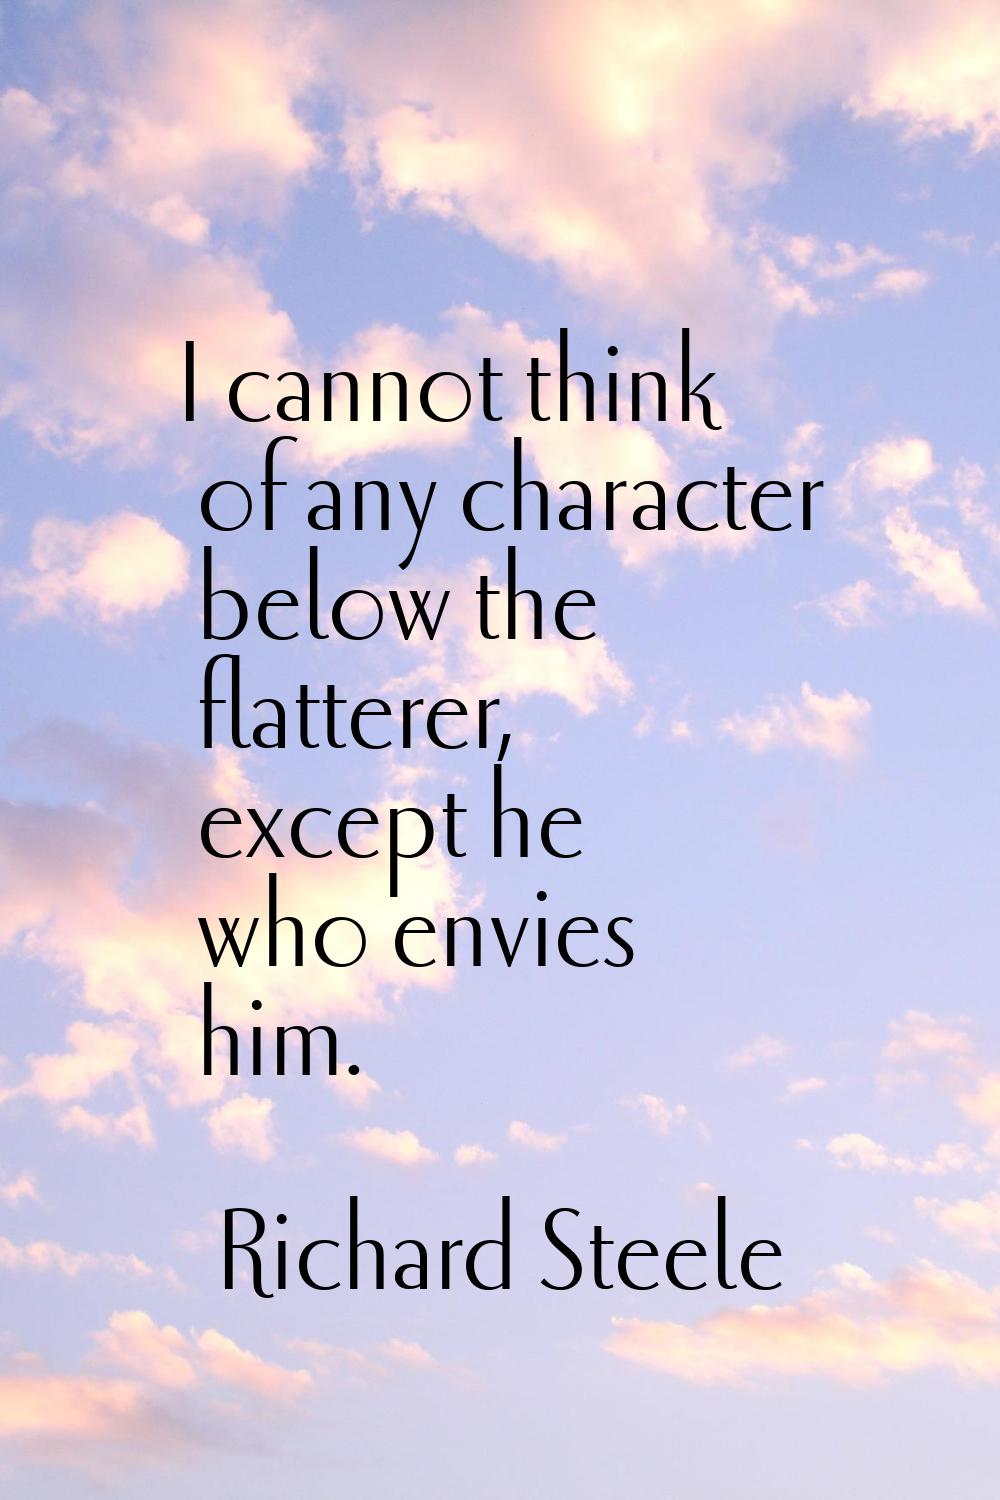 I cannot think of any character below the flatterer, except he who envies him.